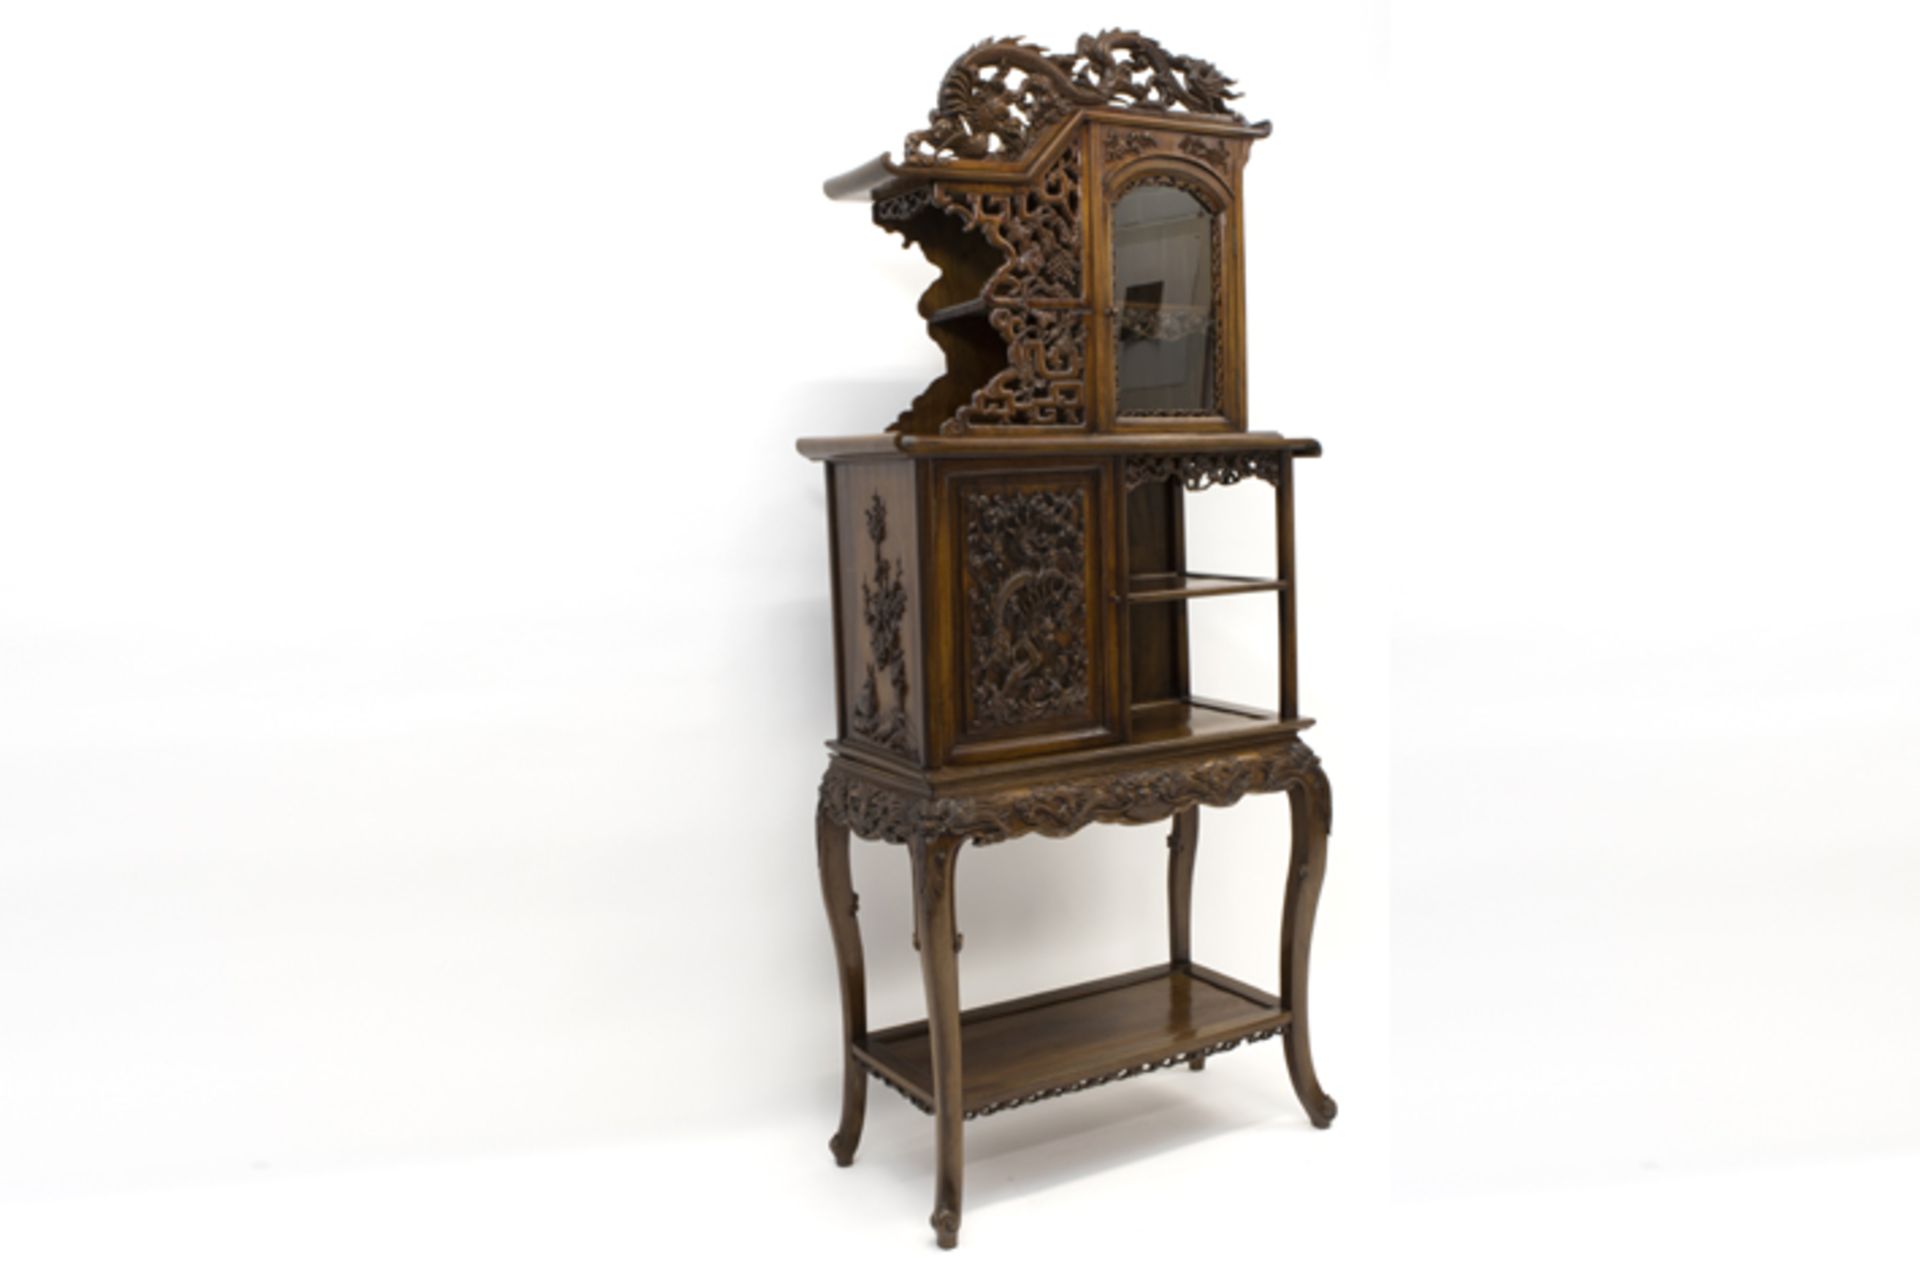 antique Chinese cabinet in an richly ornamentated exotic wood species with finely sculpted motifs - Image 4 of 4